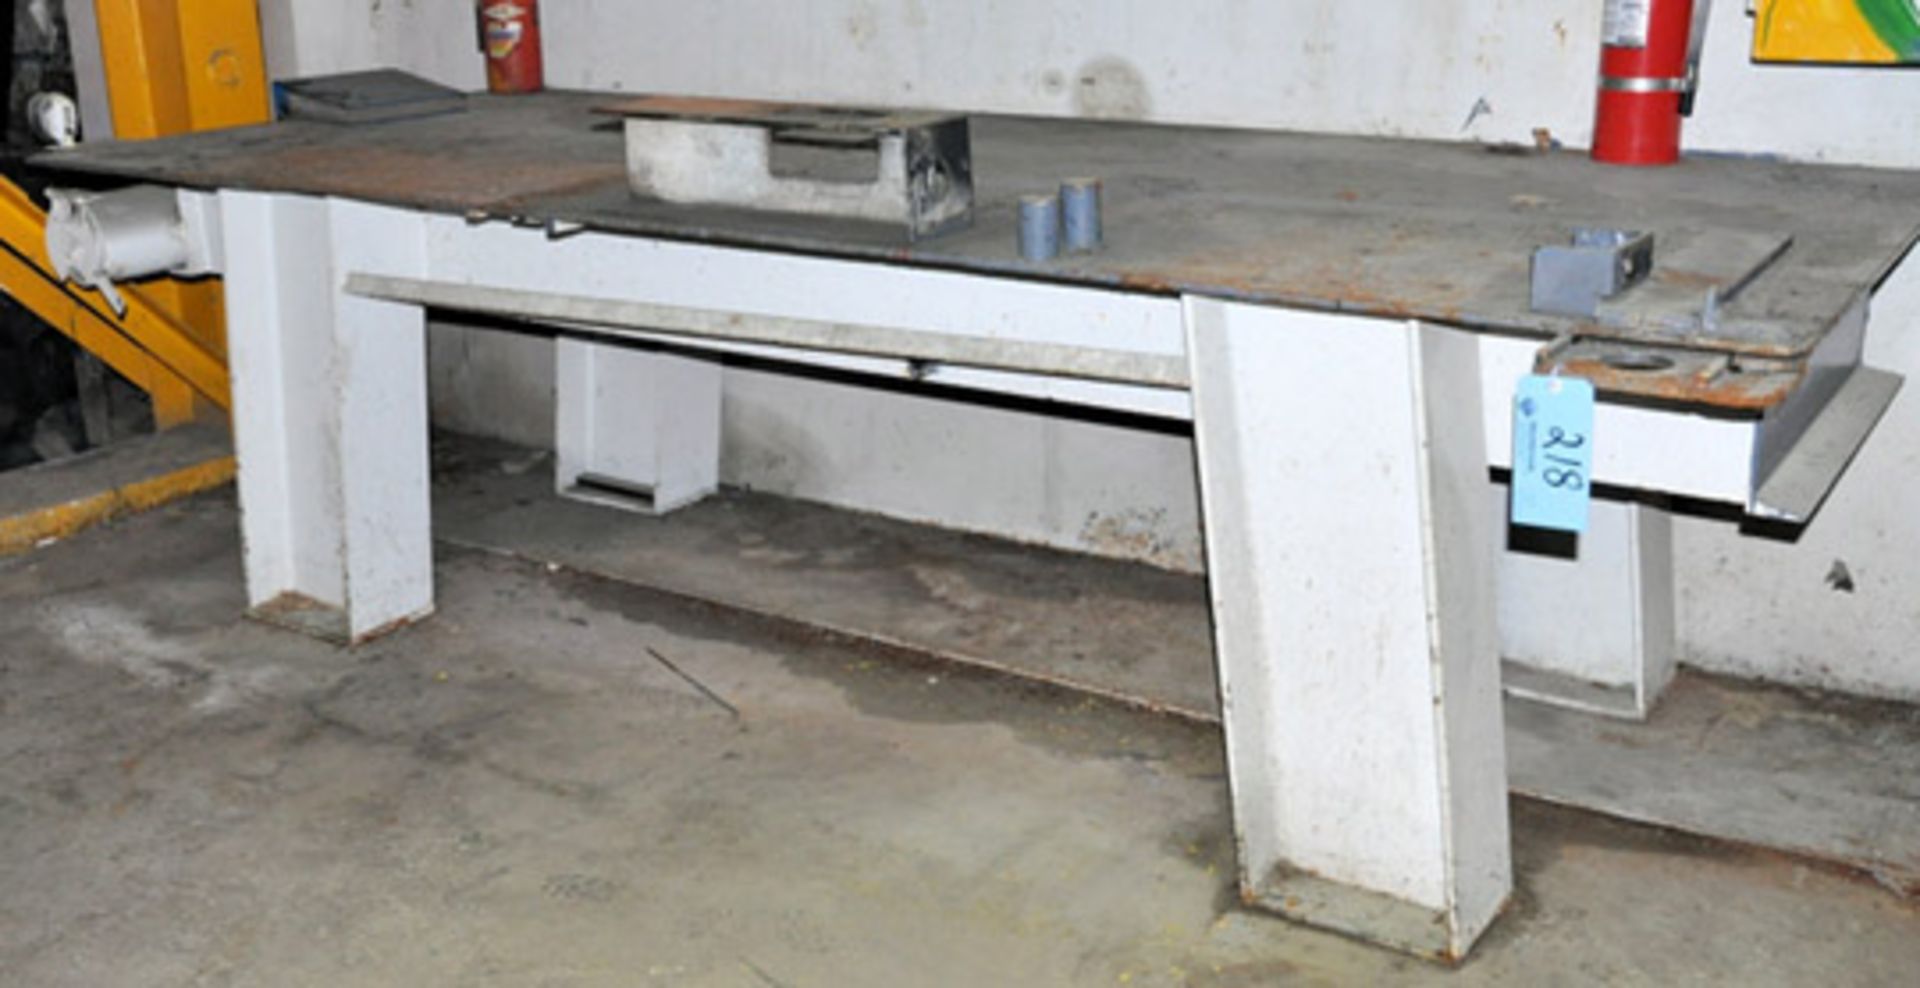 48" X 120" X 1/2" Thick Steel Work Table